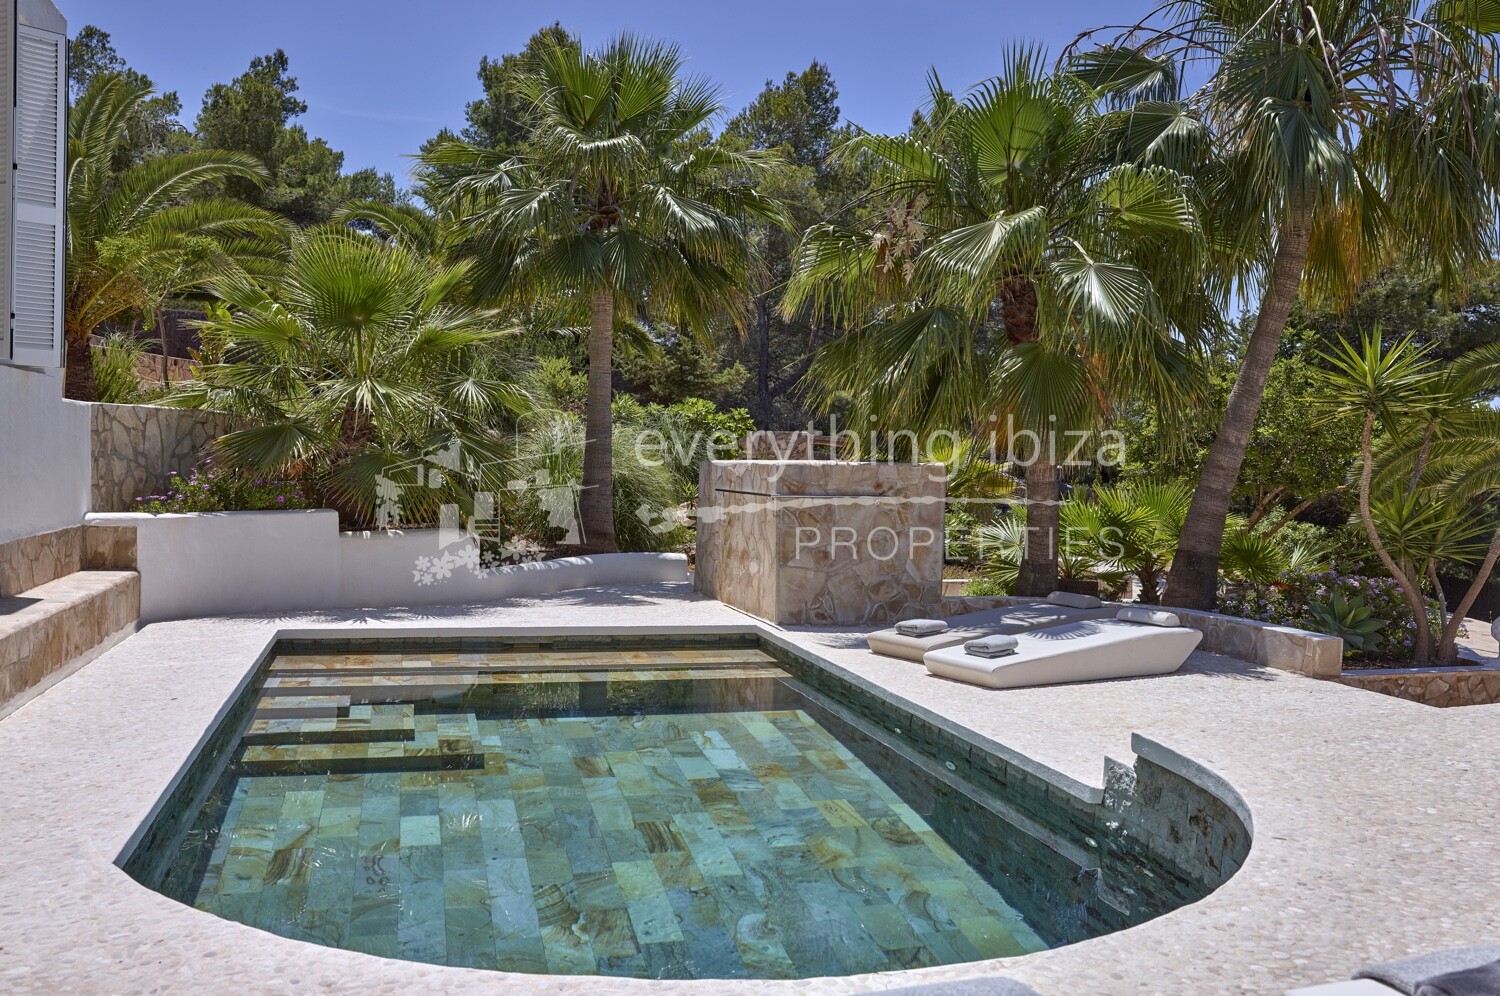 Magnificent Cosmopolitan Villa with Tourist License Set in Countryside, ref. 1488, for sale in Ibiza by everything ibiza Properties